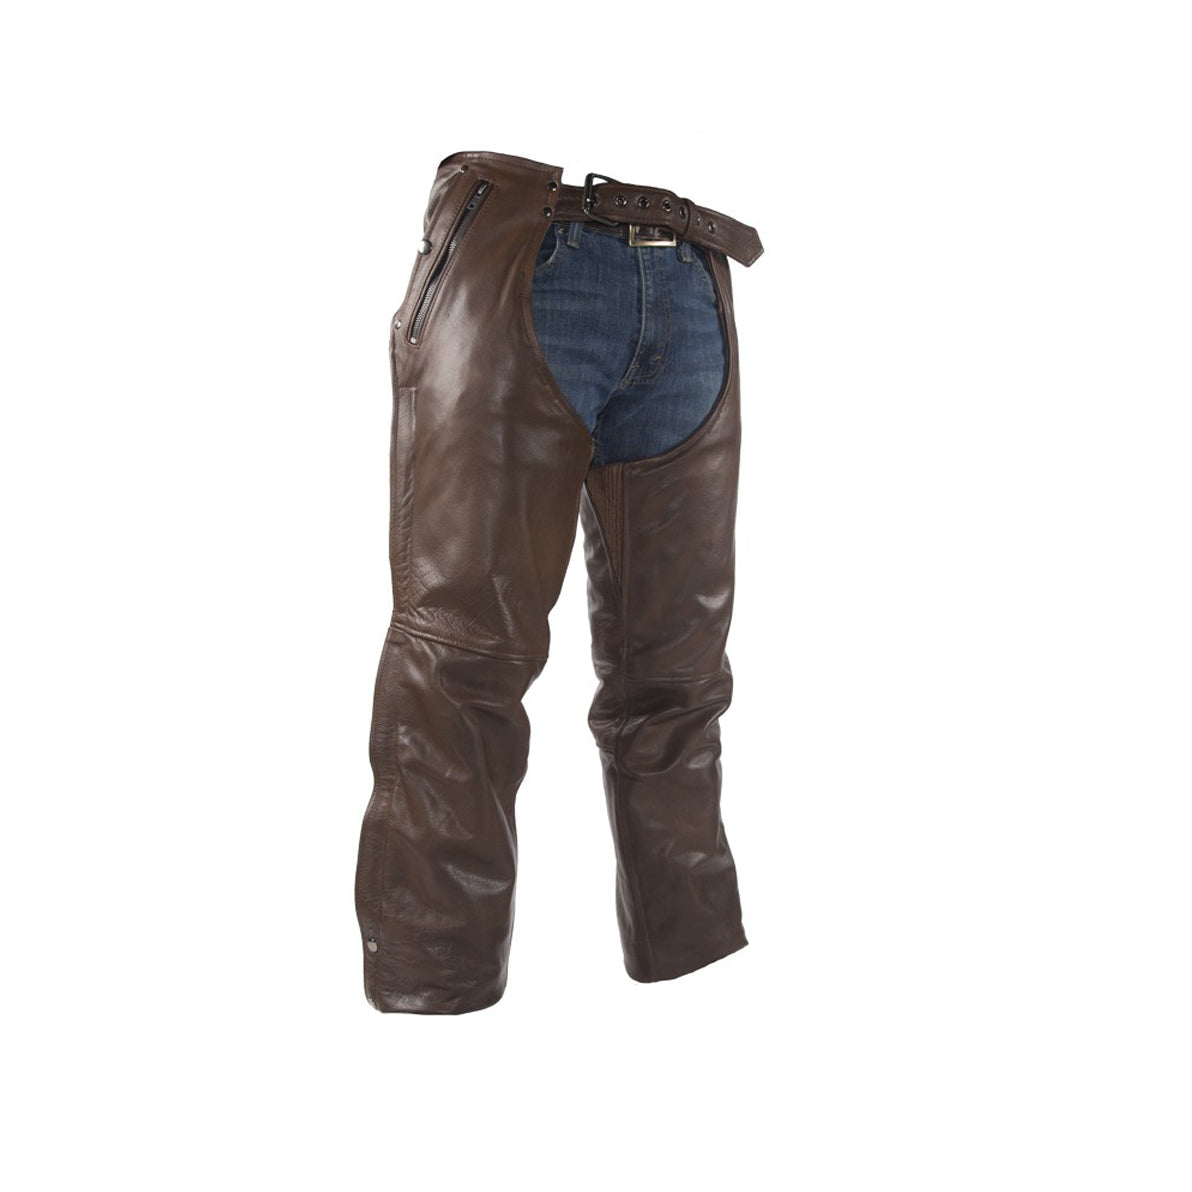 Distressed Brown Leather Motorcycle Chaps with Leather Belt